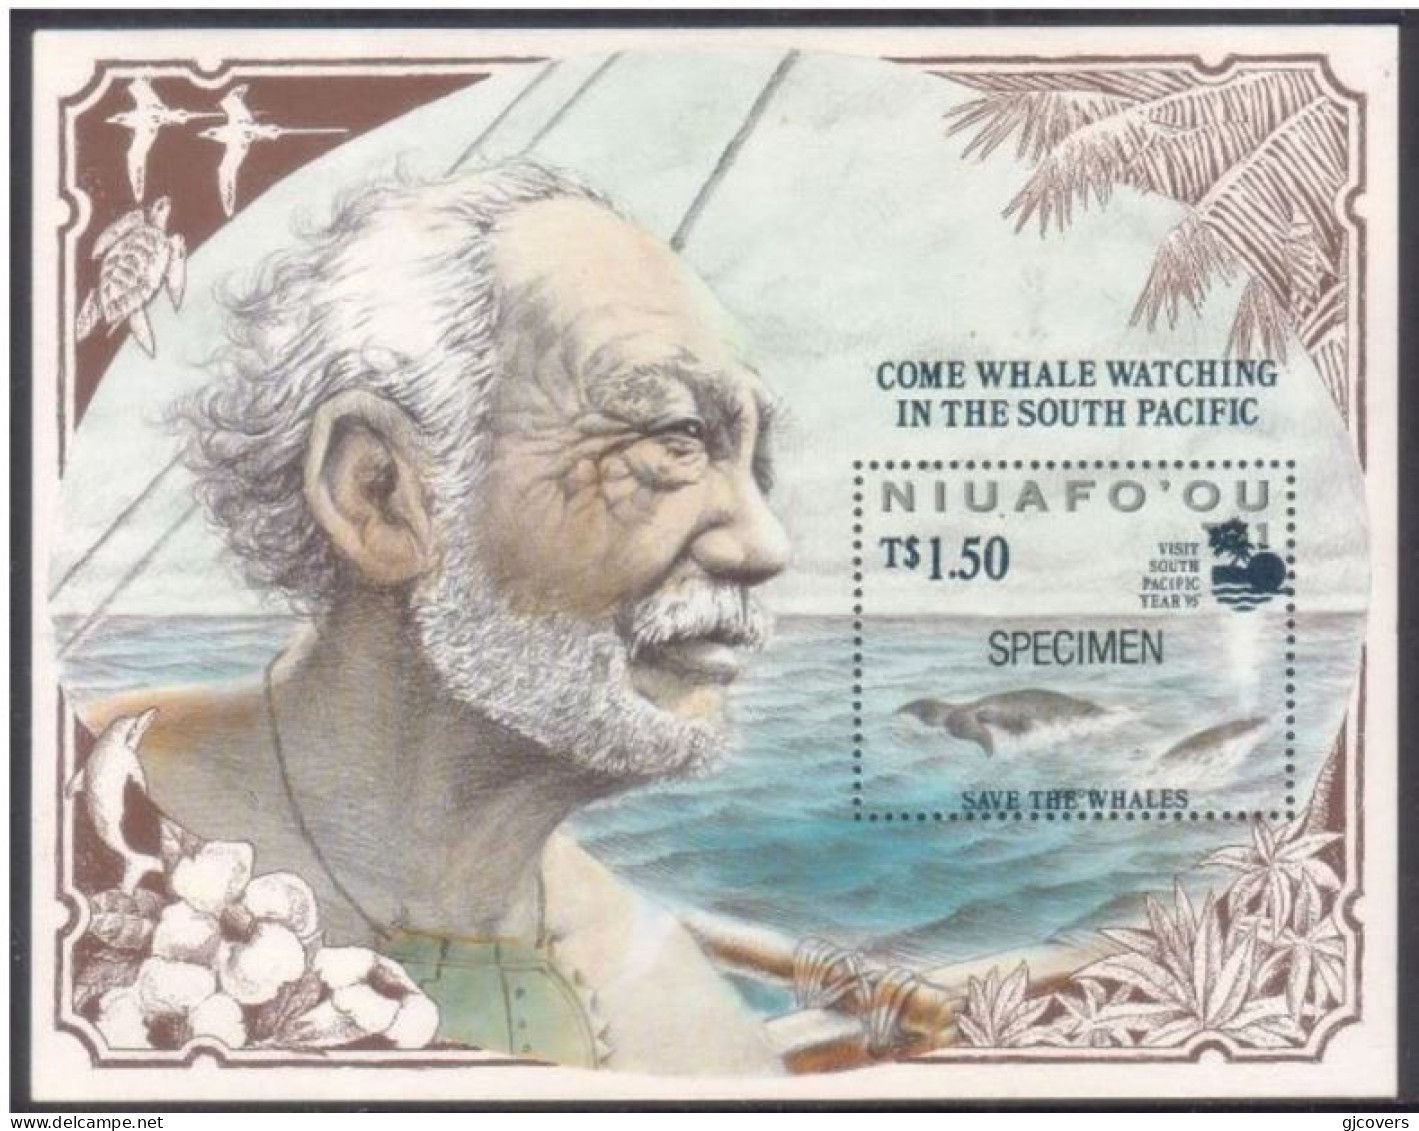 Tonga Niuafo'ou 1995 S/S  - Ovpt "Come Whale Watching" & "Save The Whales" Specimen - Whales